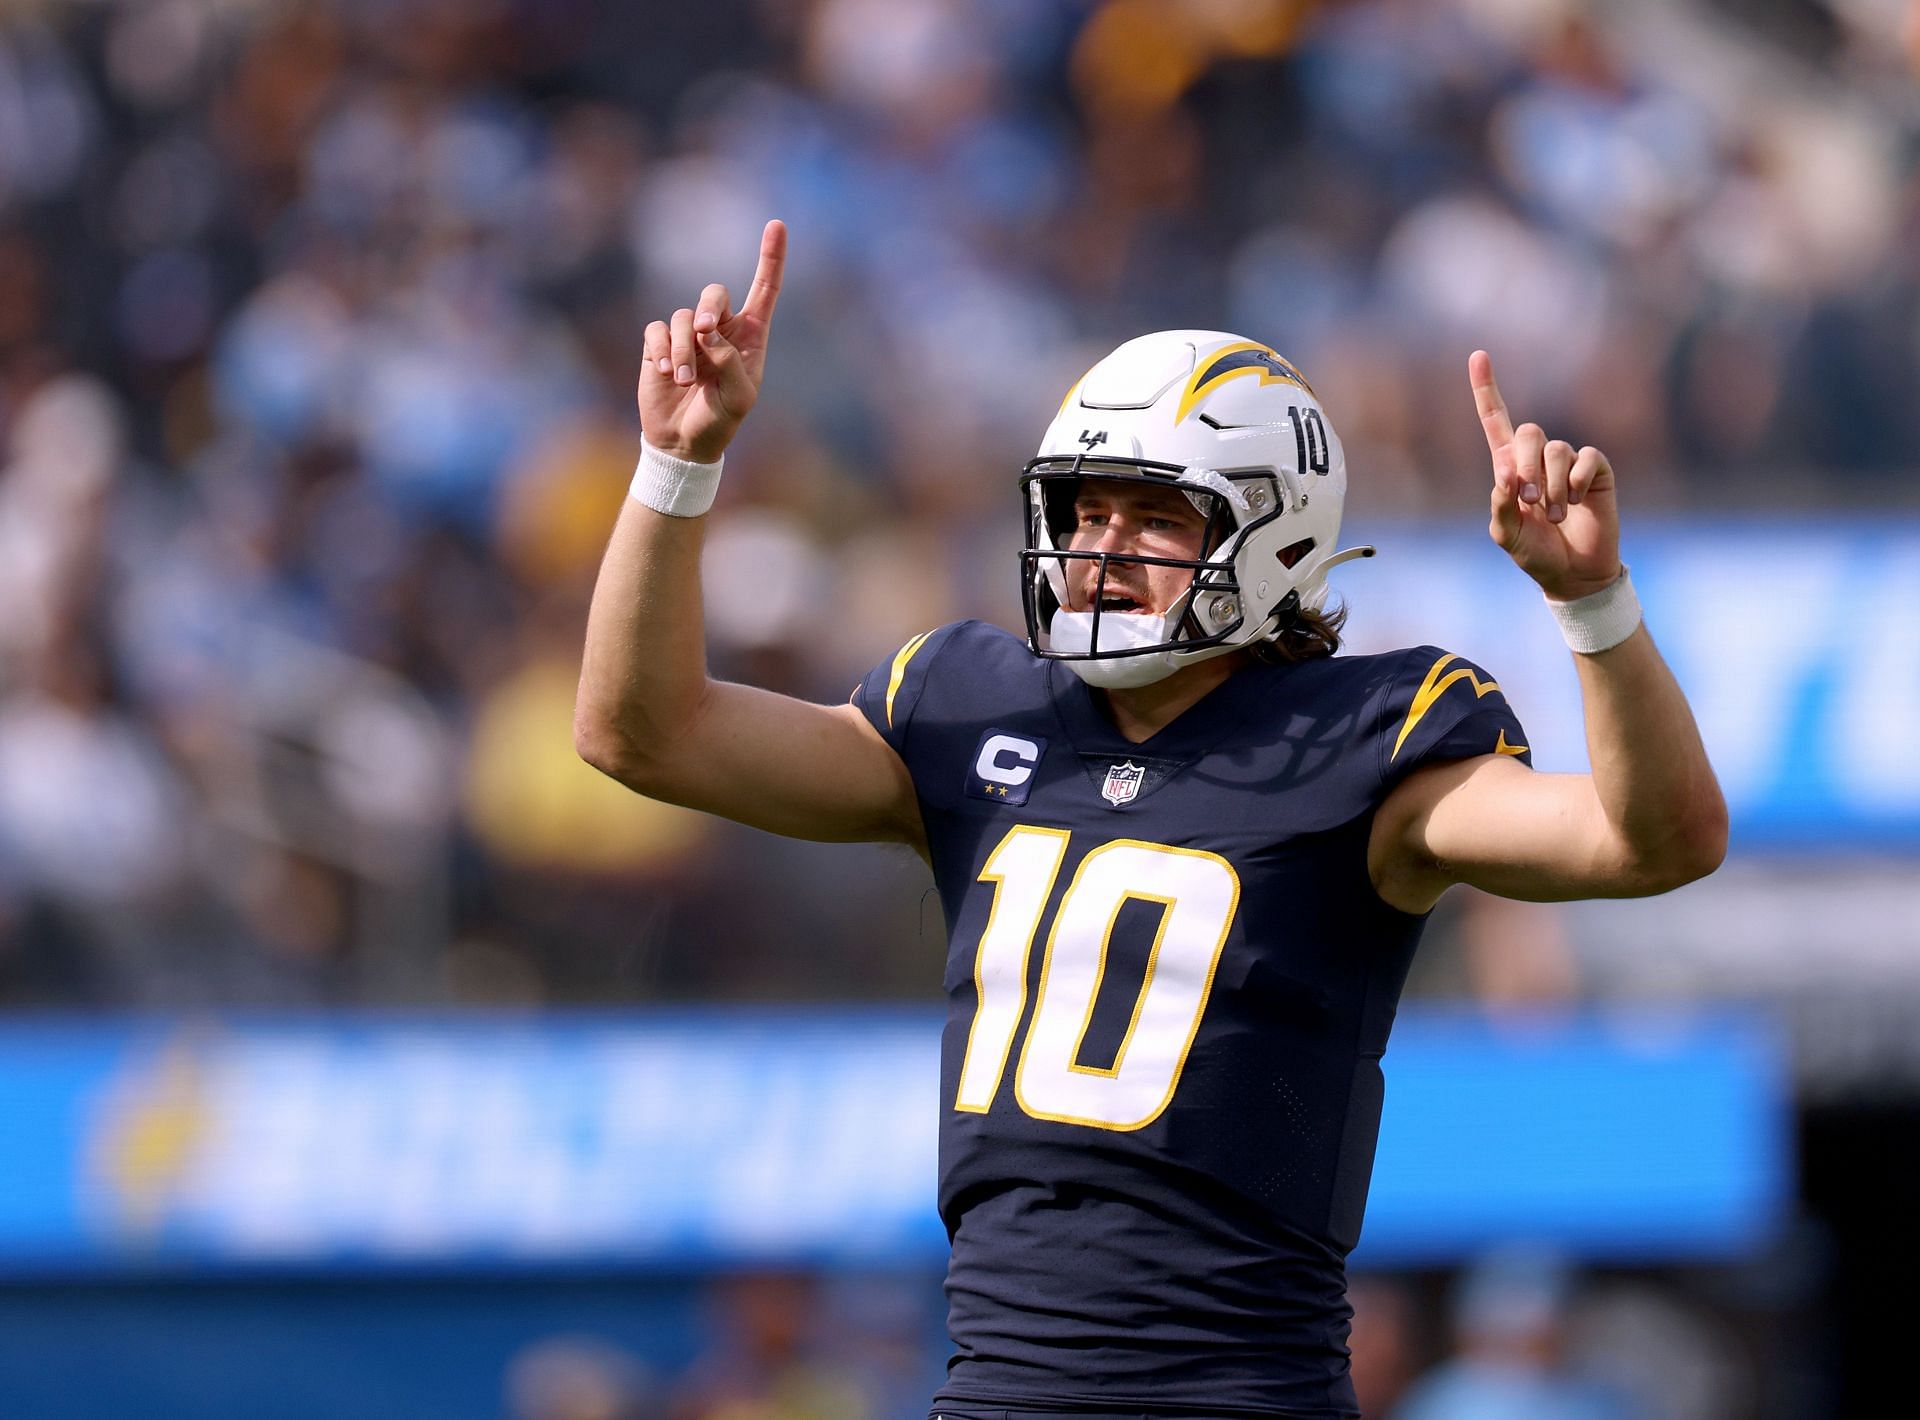 Los Angeles Chargers QB Justin Herbert is the outstanding player on Oregon's 2022 NFL Top 10 Players list